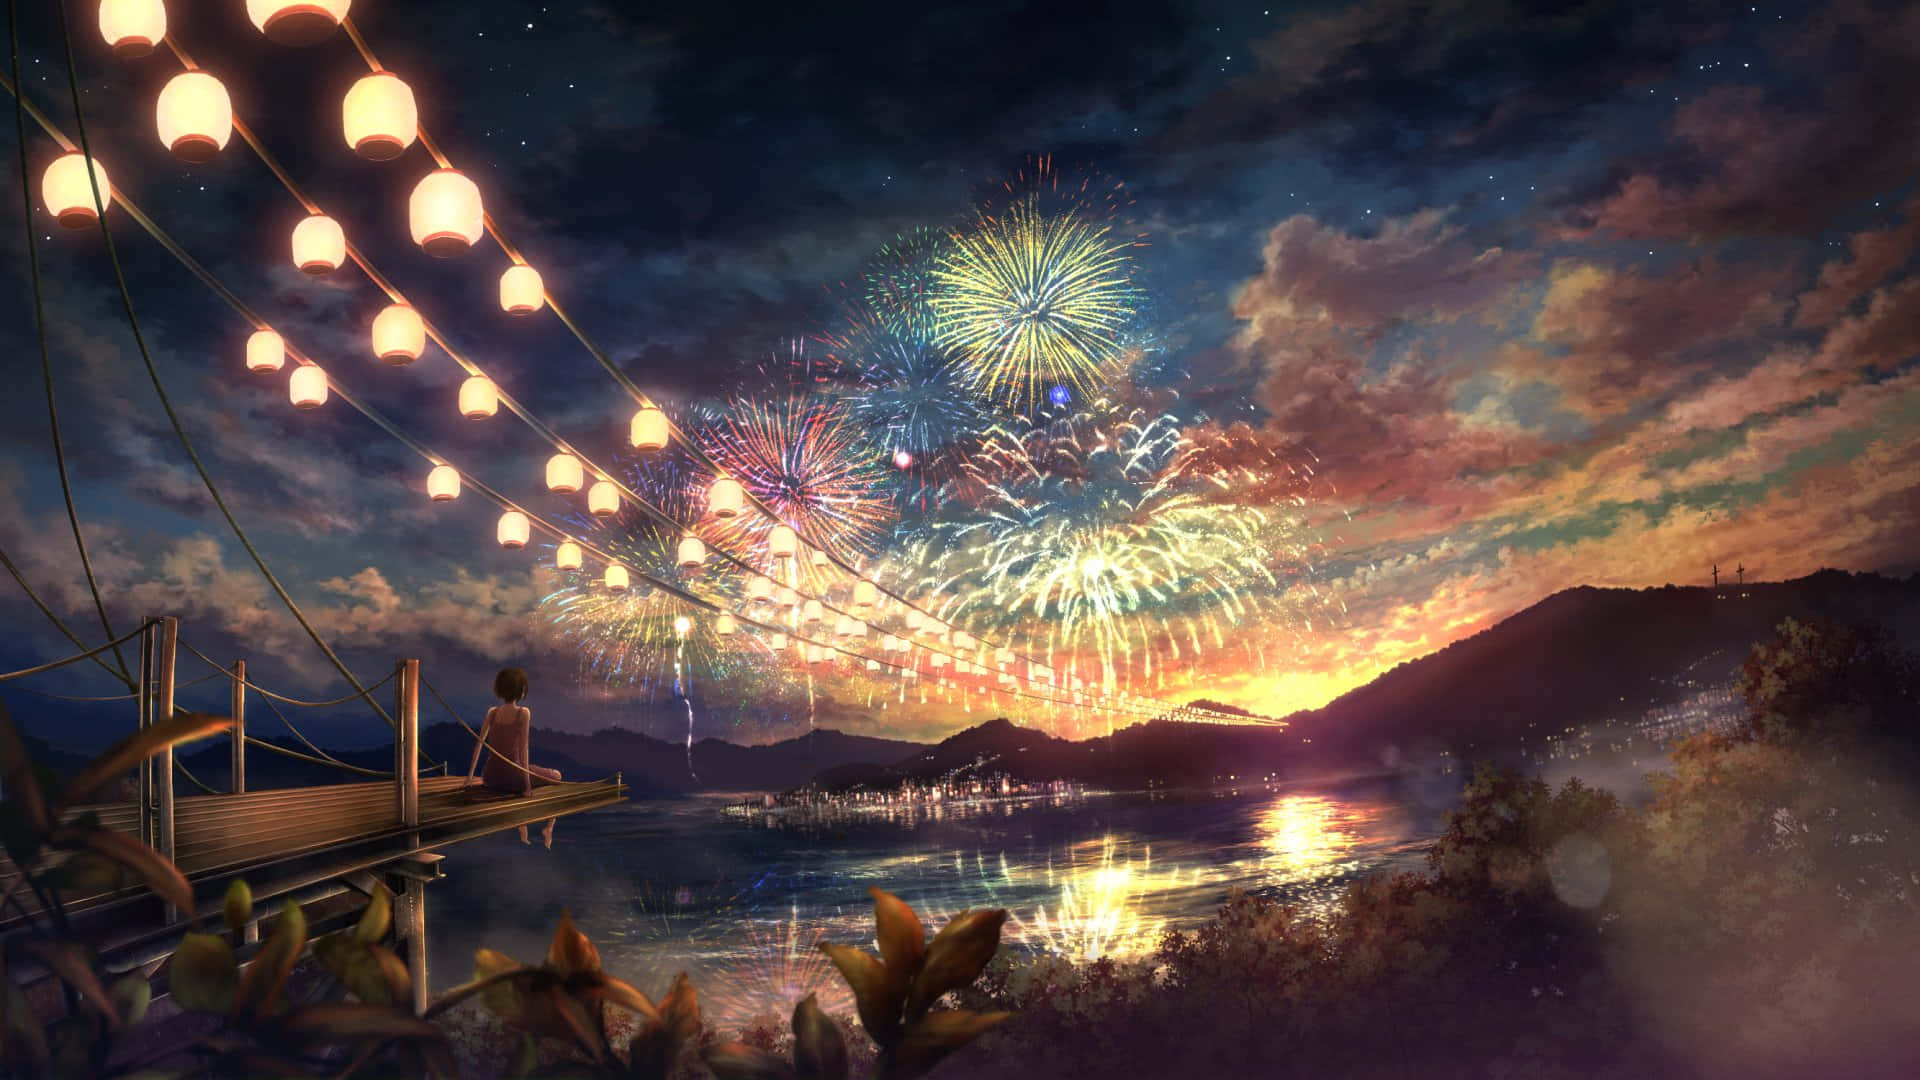 Girl Watching The Fireworks Display Painting Wallpaper